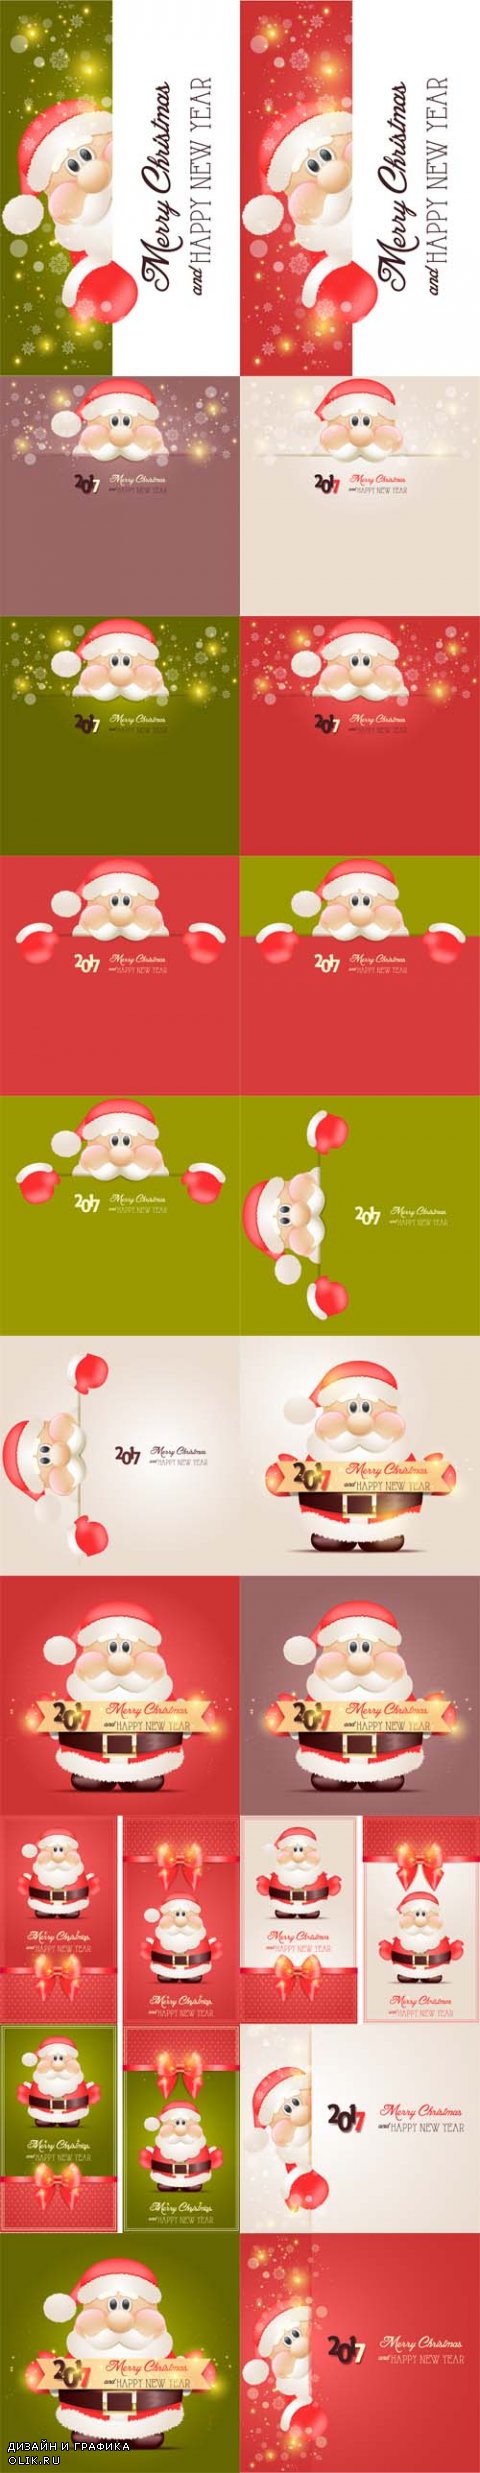 Vector Santa Claus Backgrounds and Banners 2017